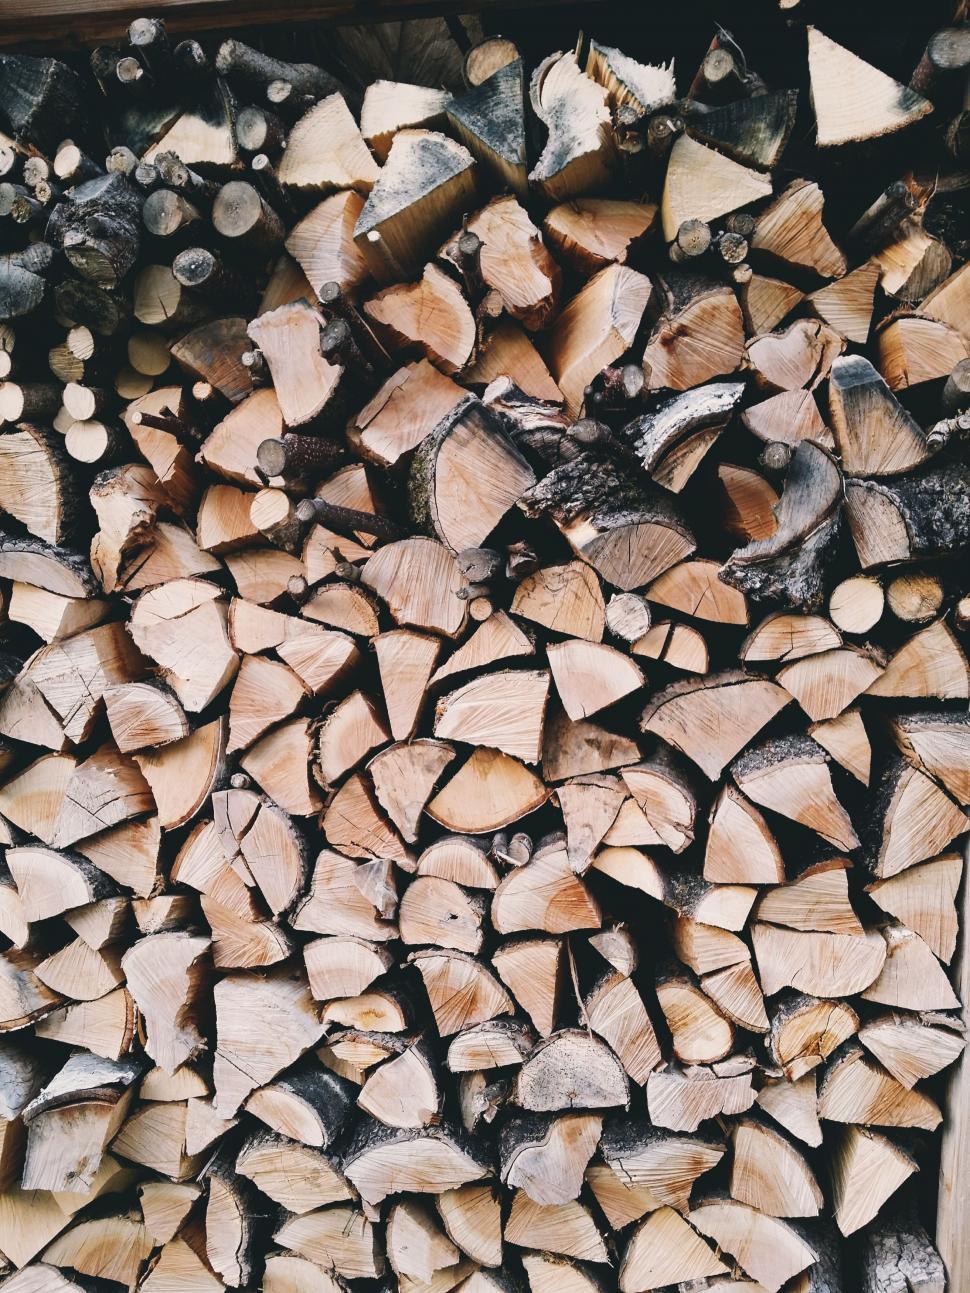 Free Image of Pile of Wood Next to Logs 